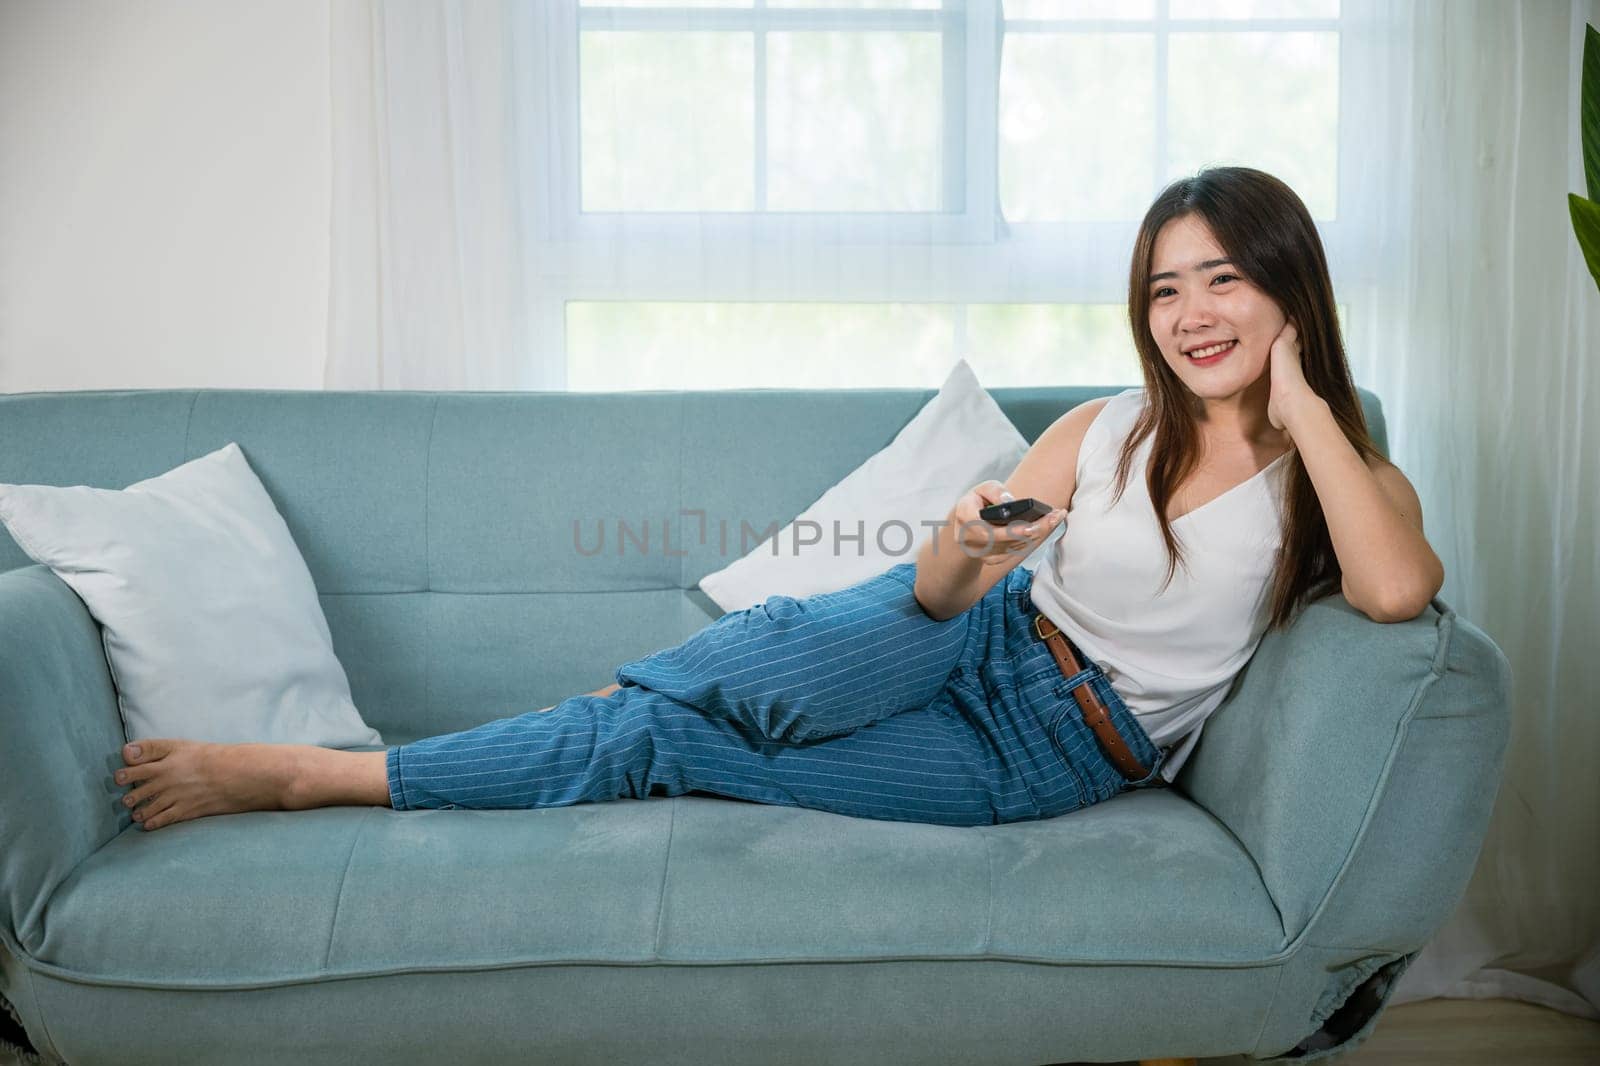 woman smiling sitting relax watch TV holding remote control by Sorapop